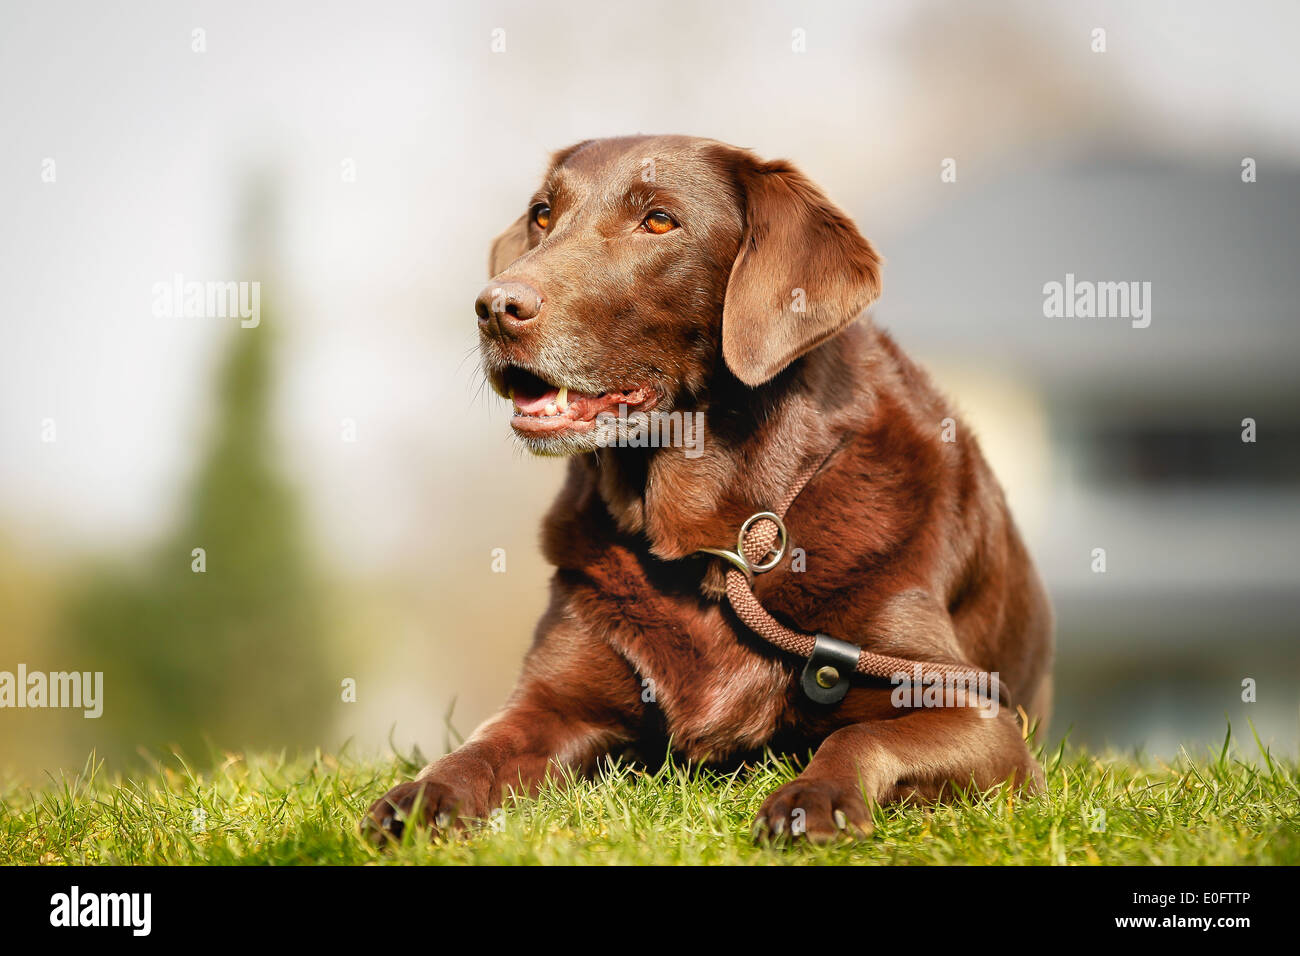 Brown labrador retriever lying outside on grass during spring time. Stock Photo